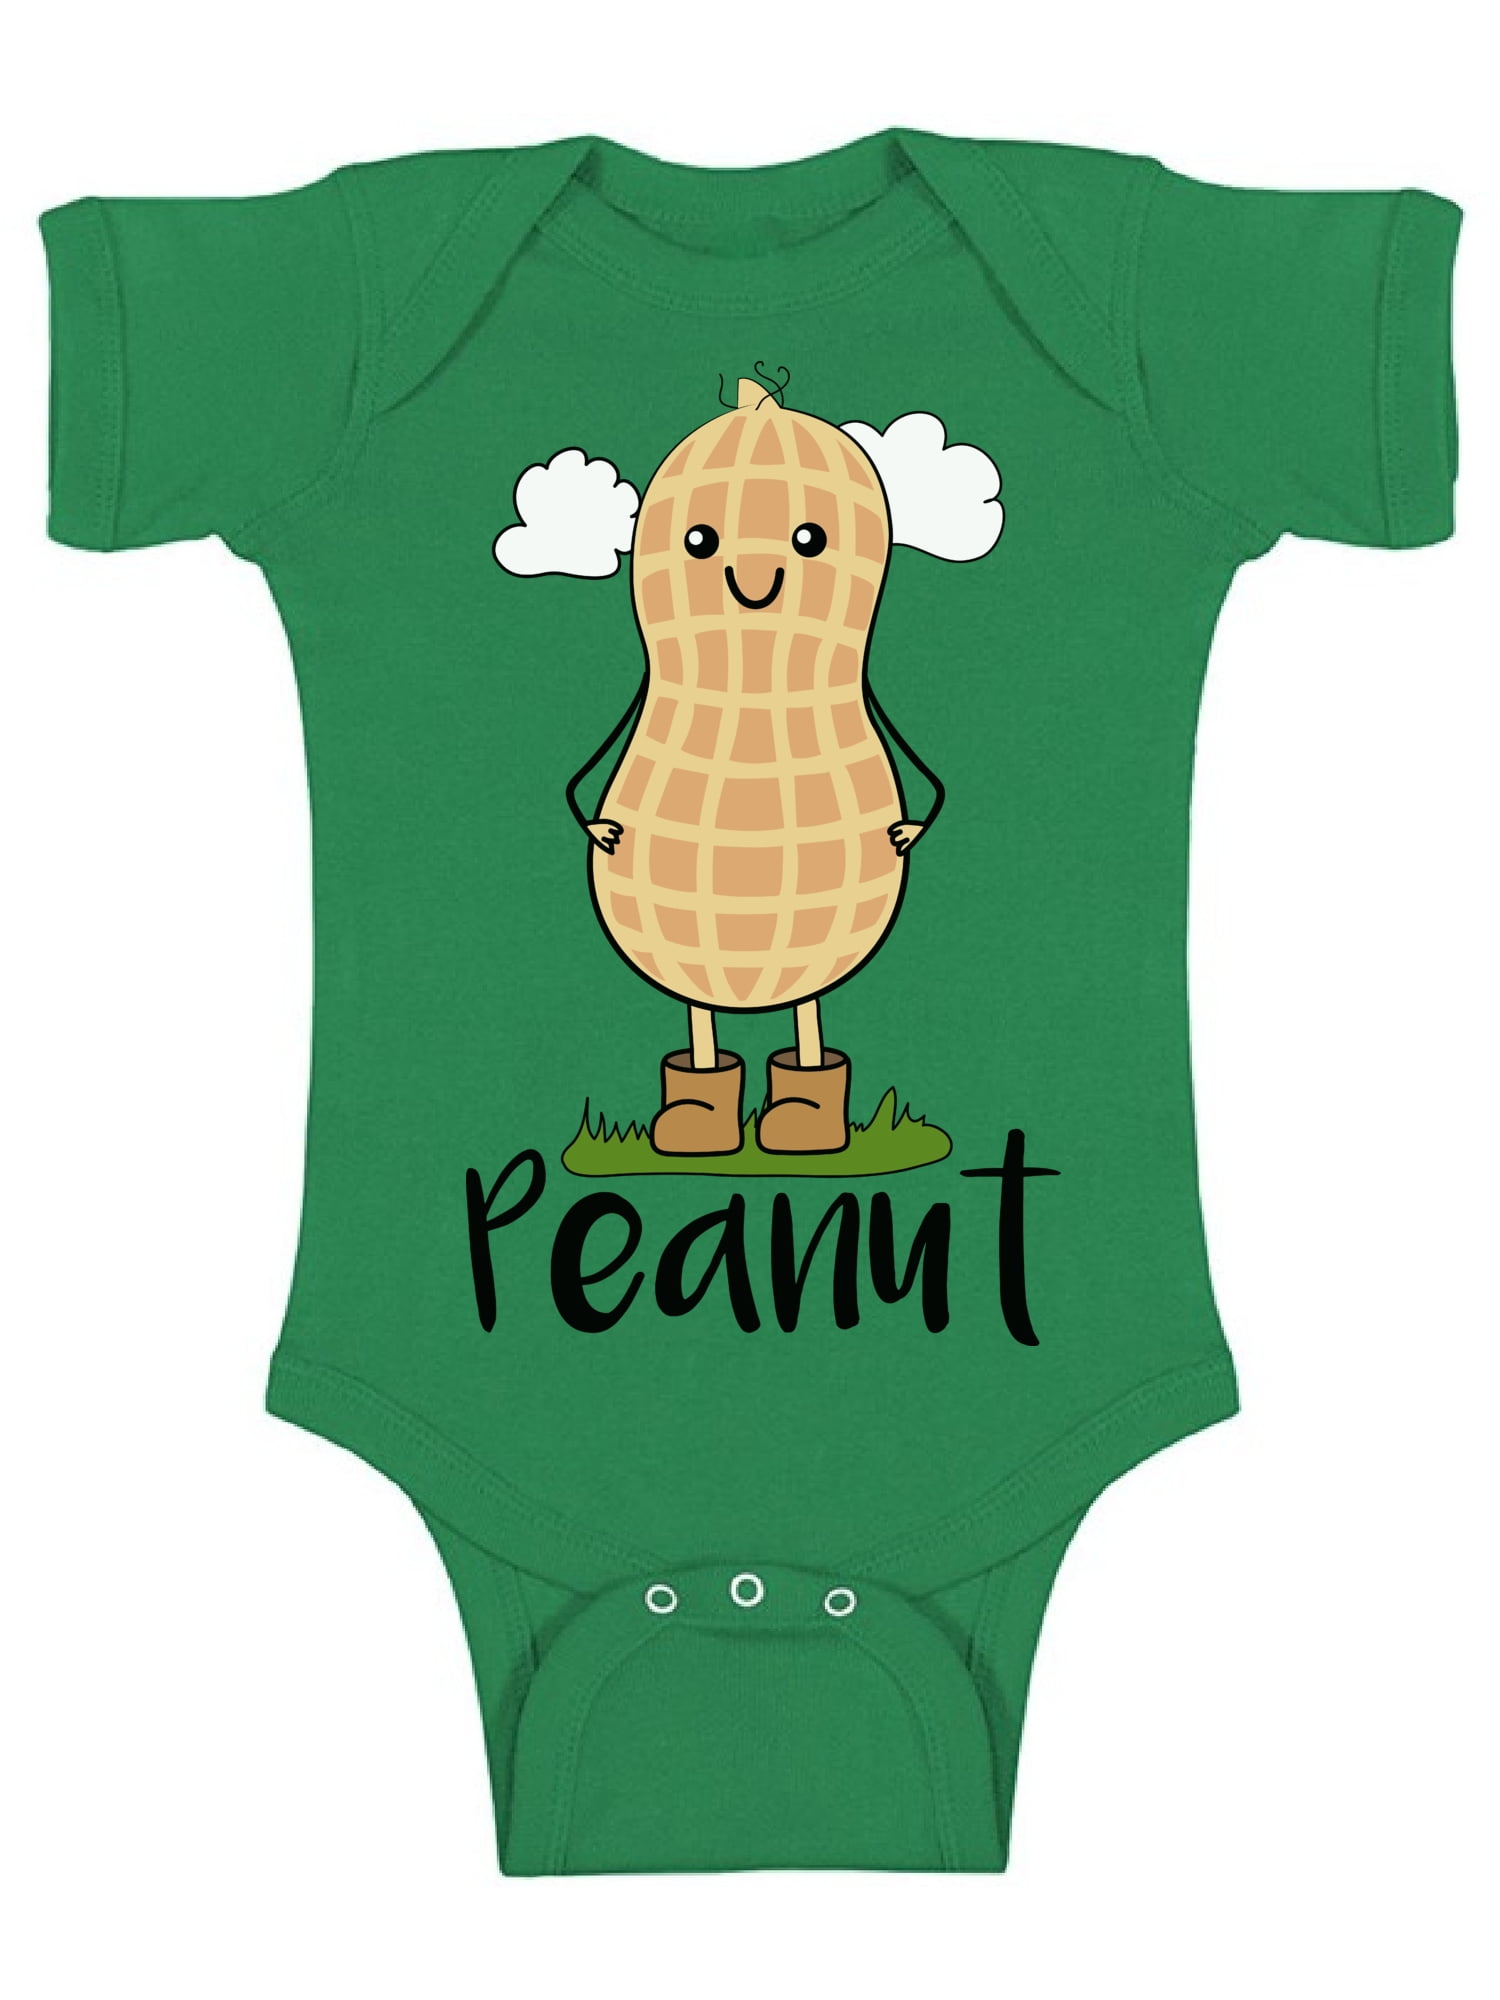 Little Peanut Newborn Baby T-shirt Toddler Graphic Tee Tops Gifts for New Family 